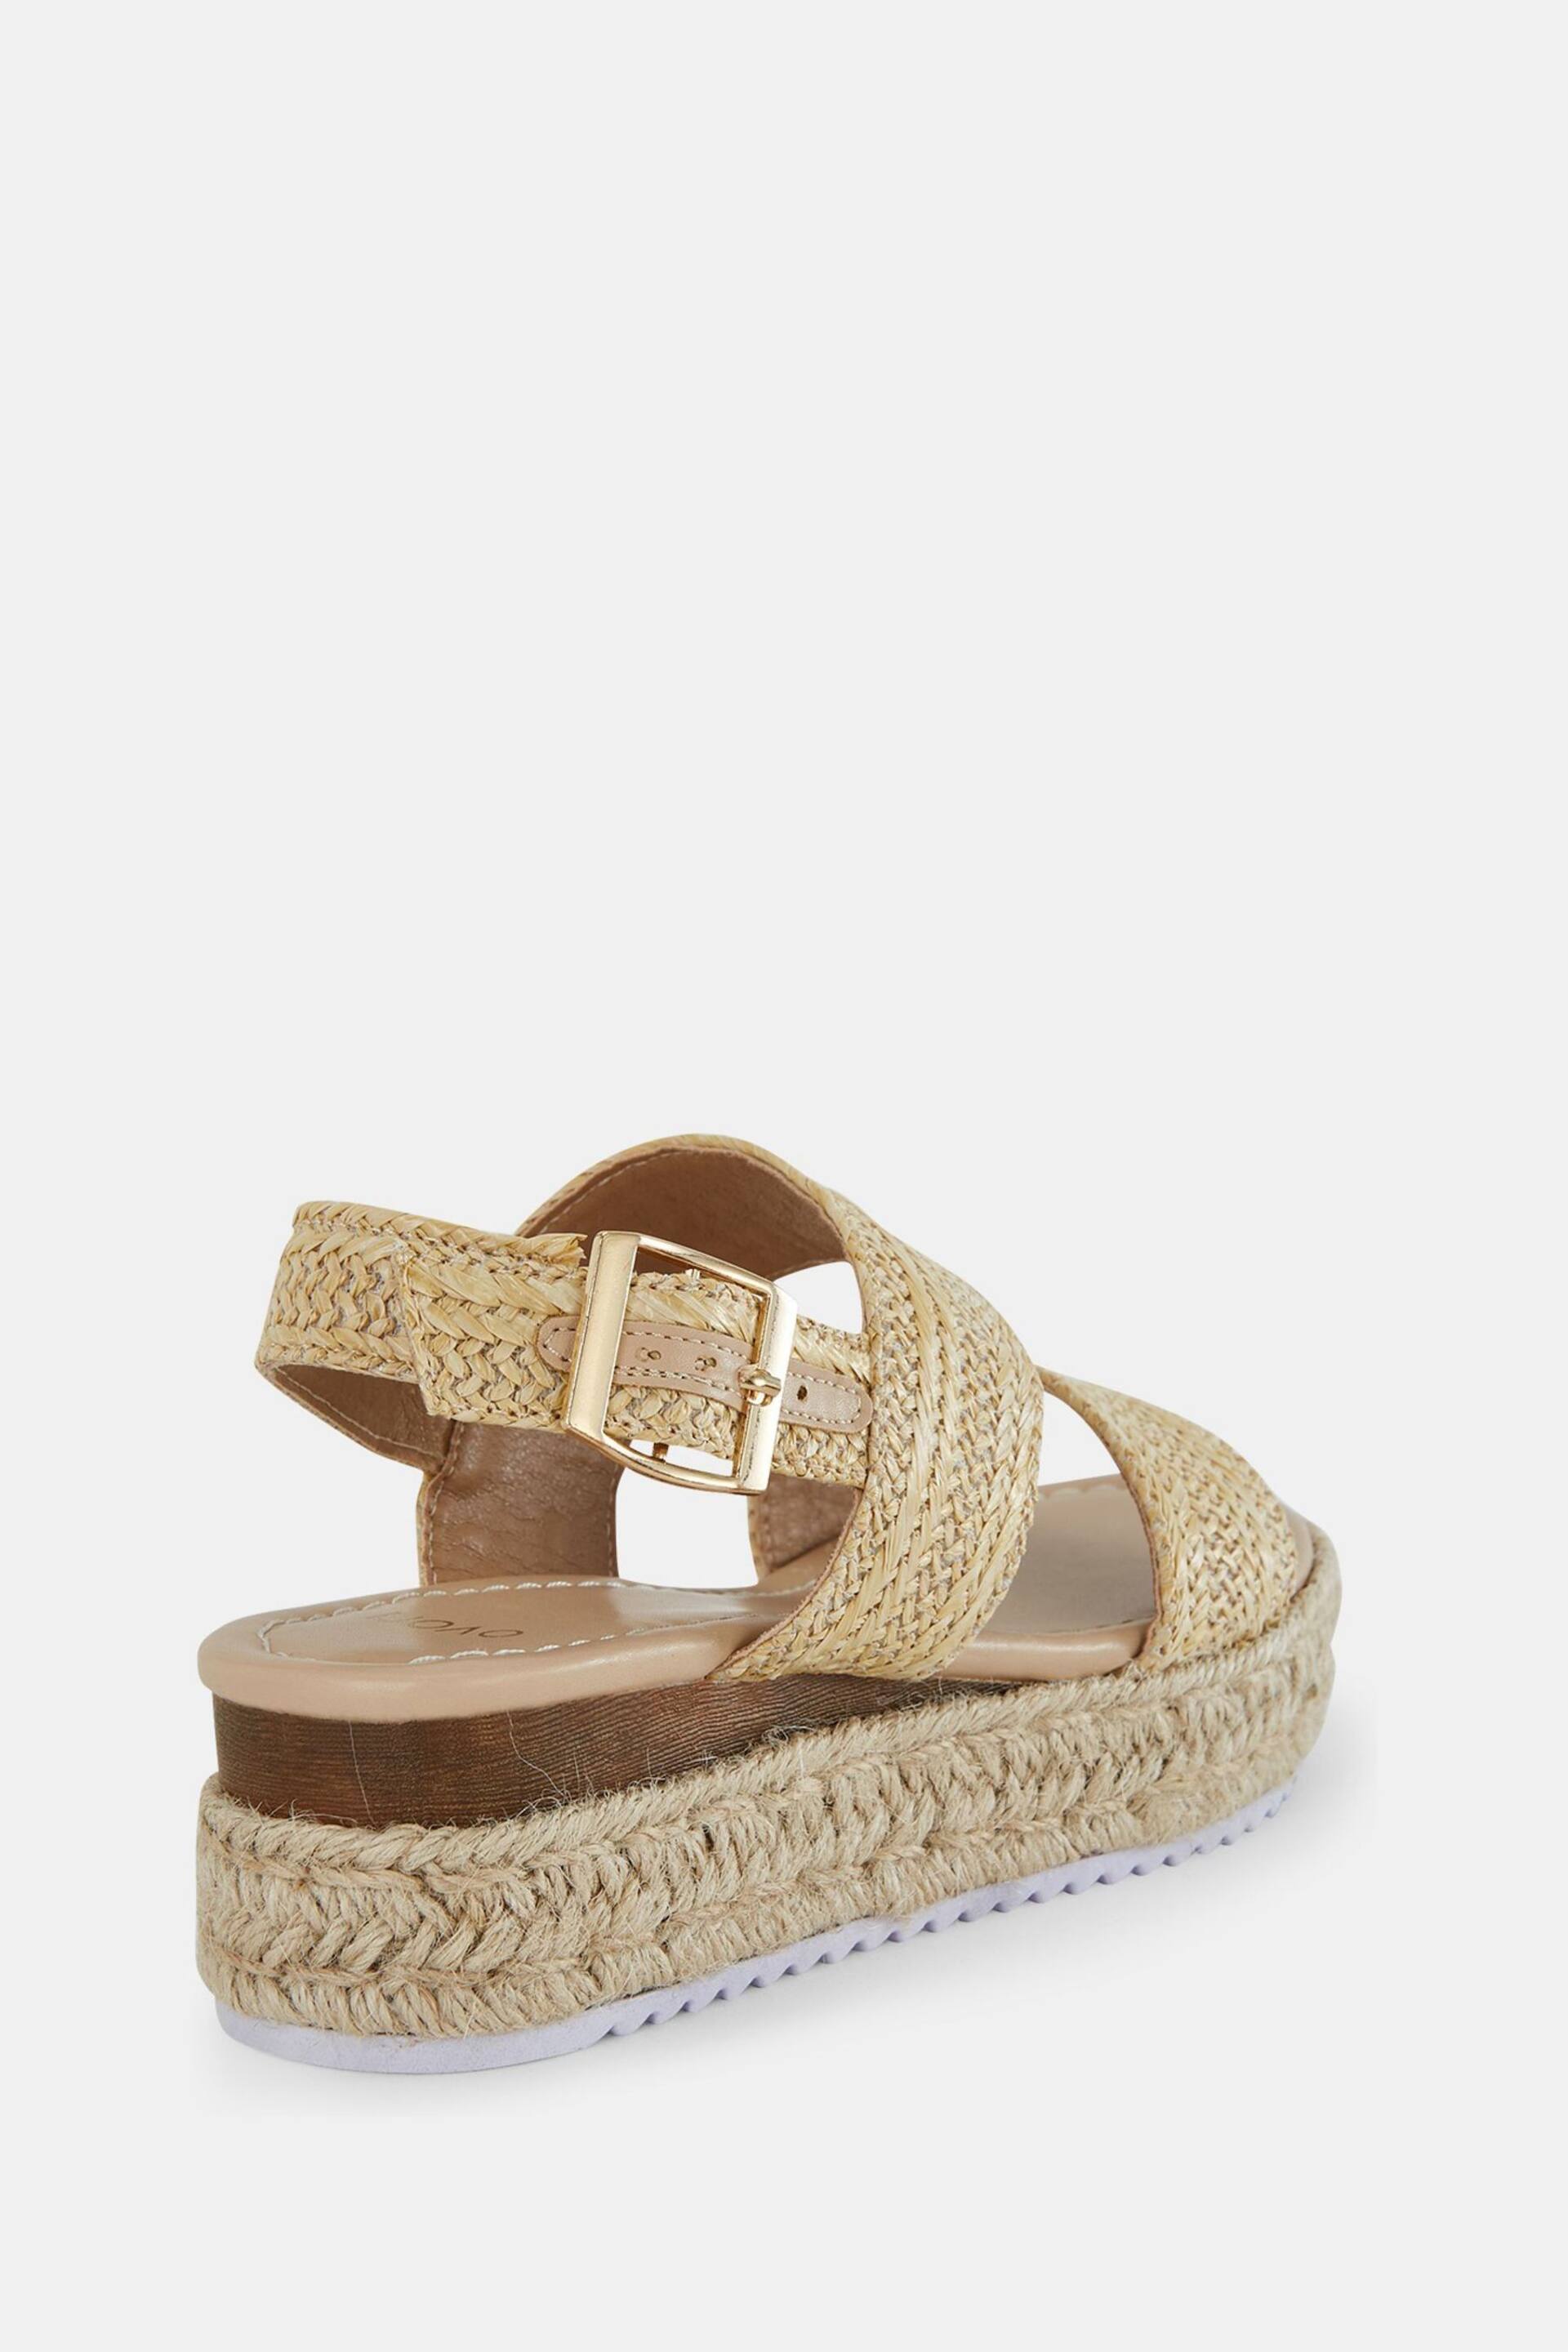 Novo Natural Wide Fit Sadie Espadrille Double Strap Sandals - Image 6 of 6